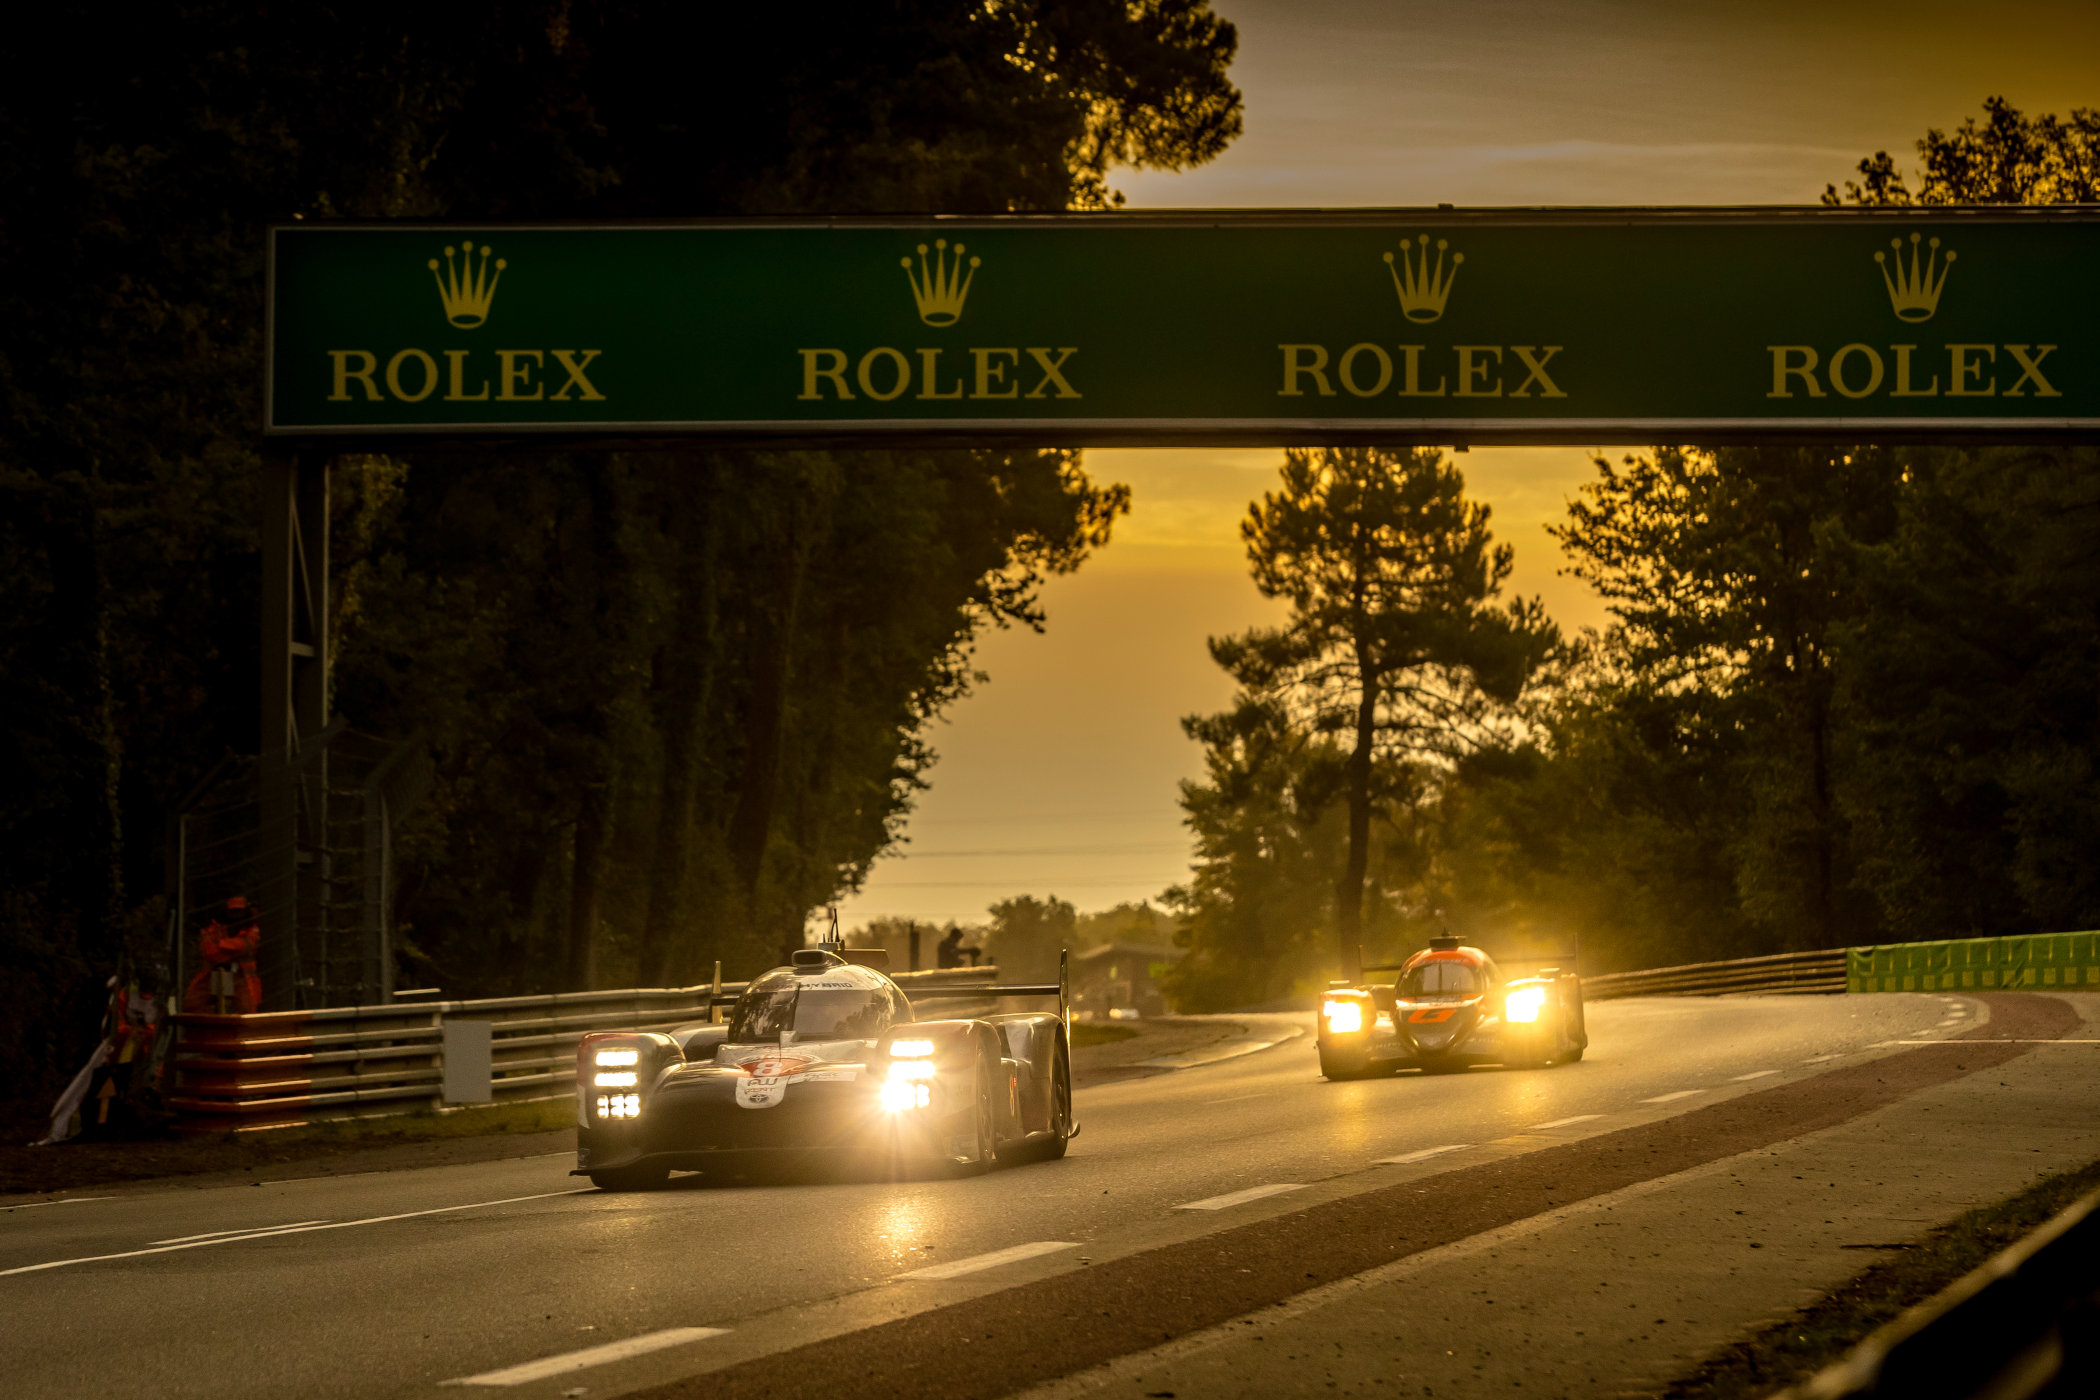 24 hours of Le Mans 2020